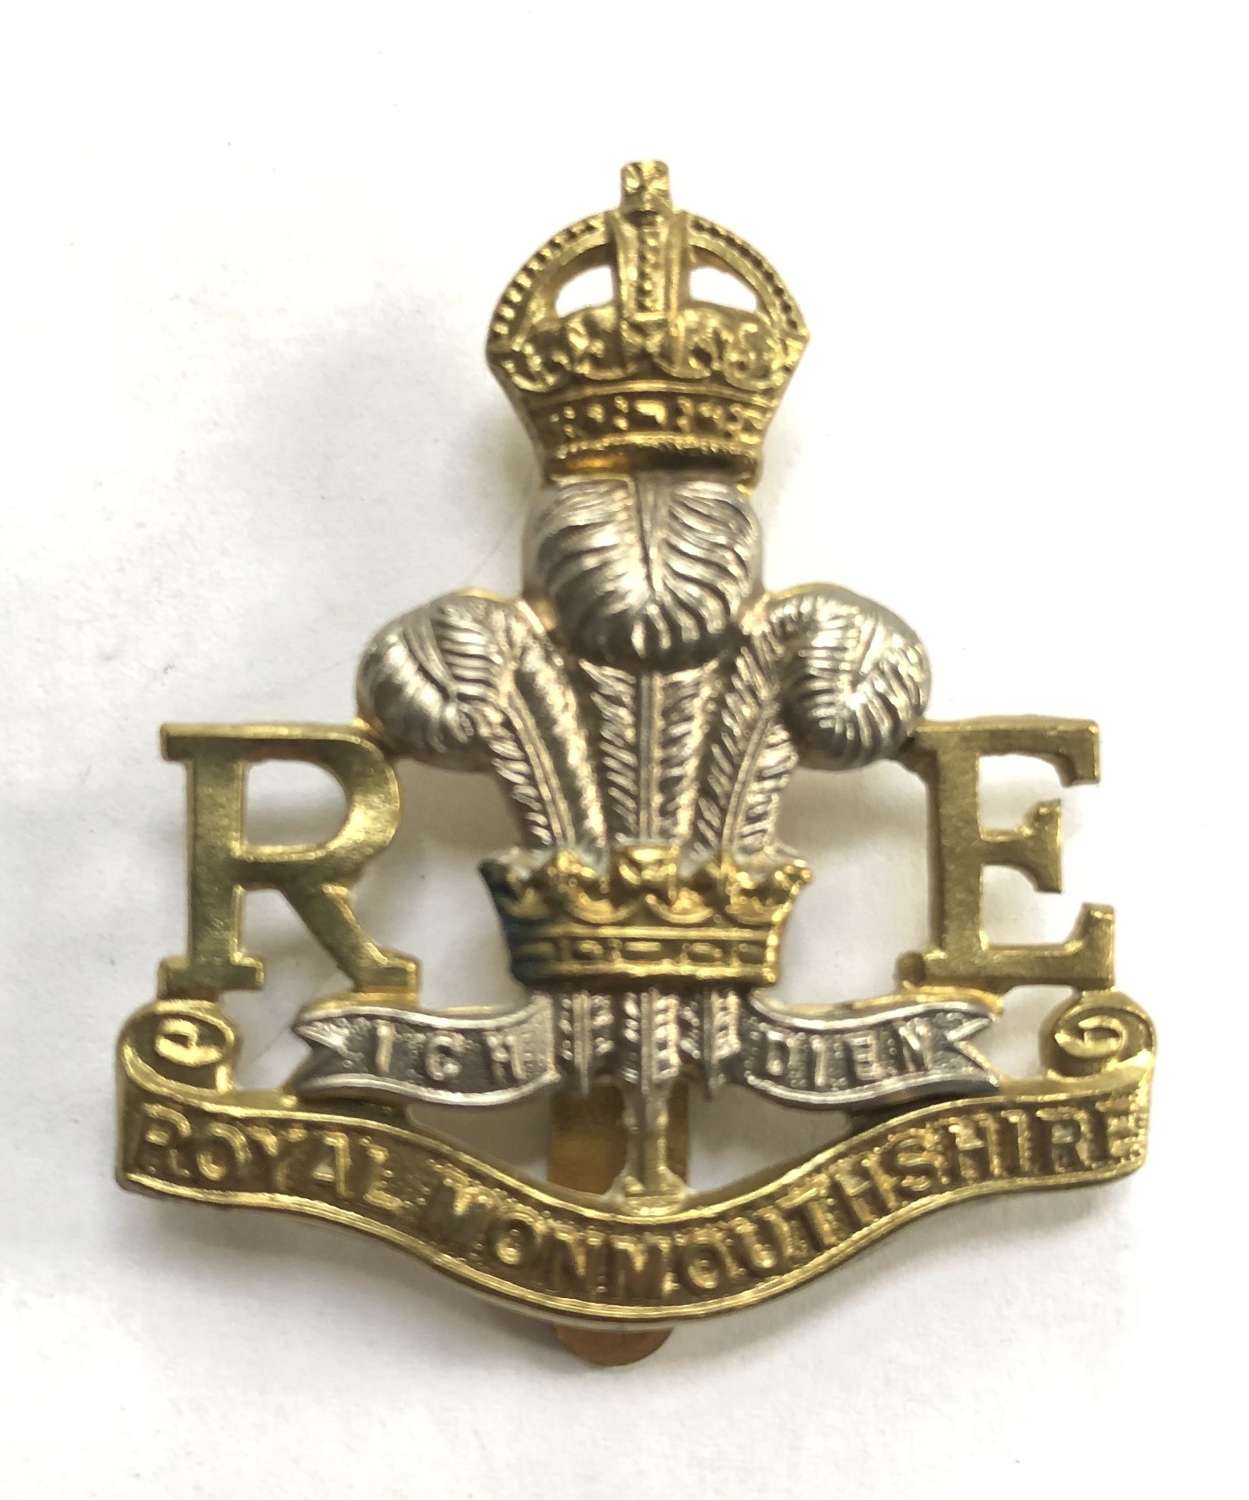 Royal Monmouthshire Royal Engineers (Militia) cap badge by Gaunt